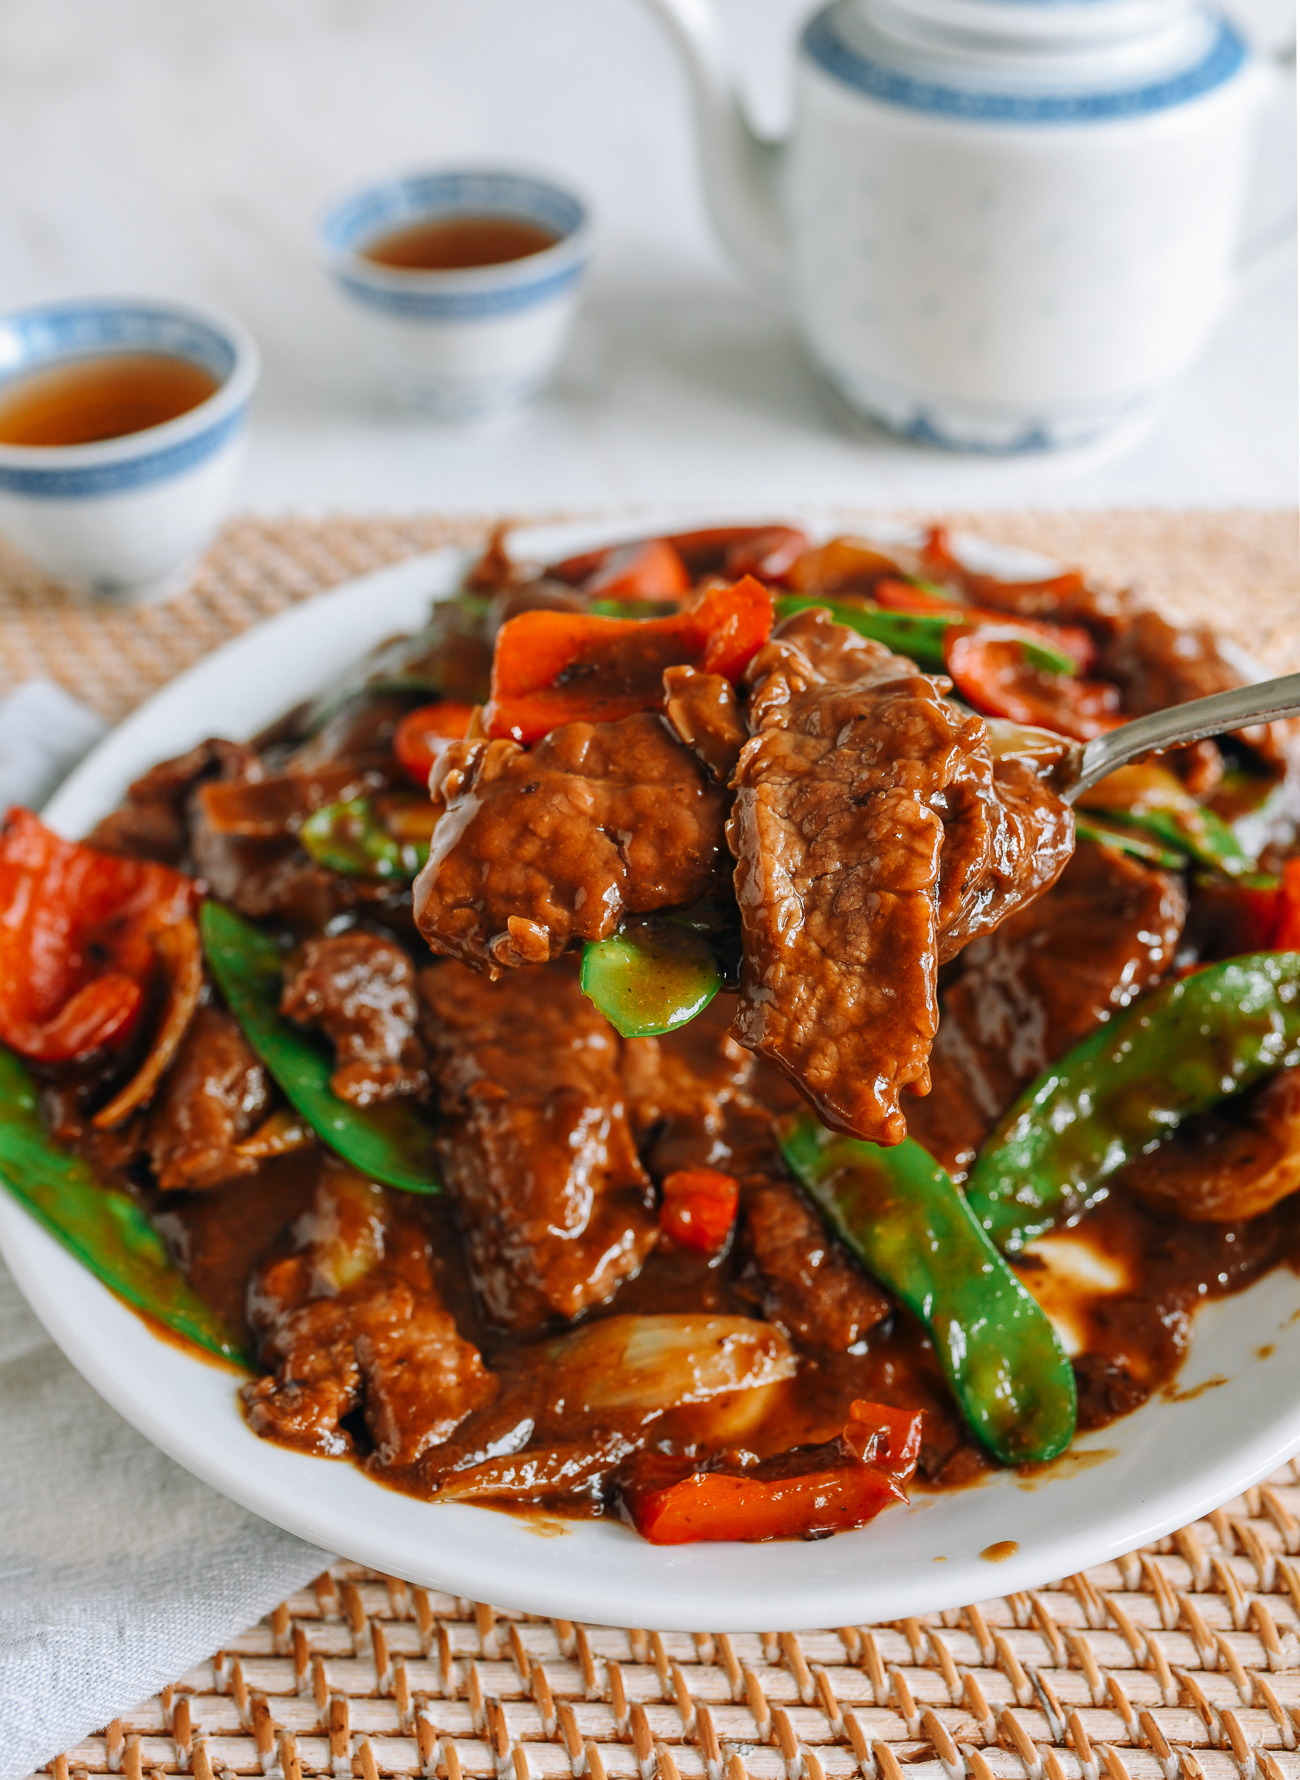 Serving beef with black bean sauce